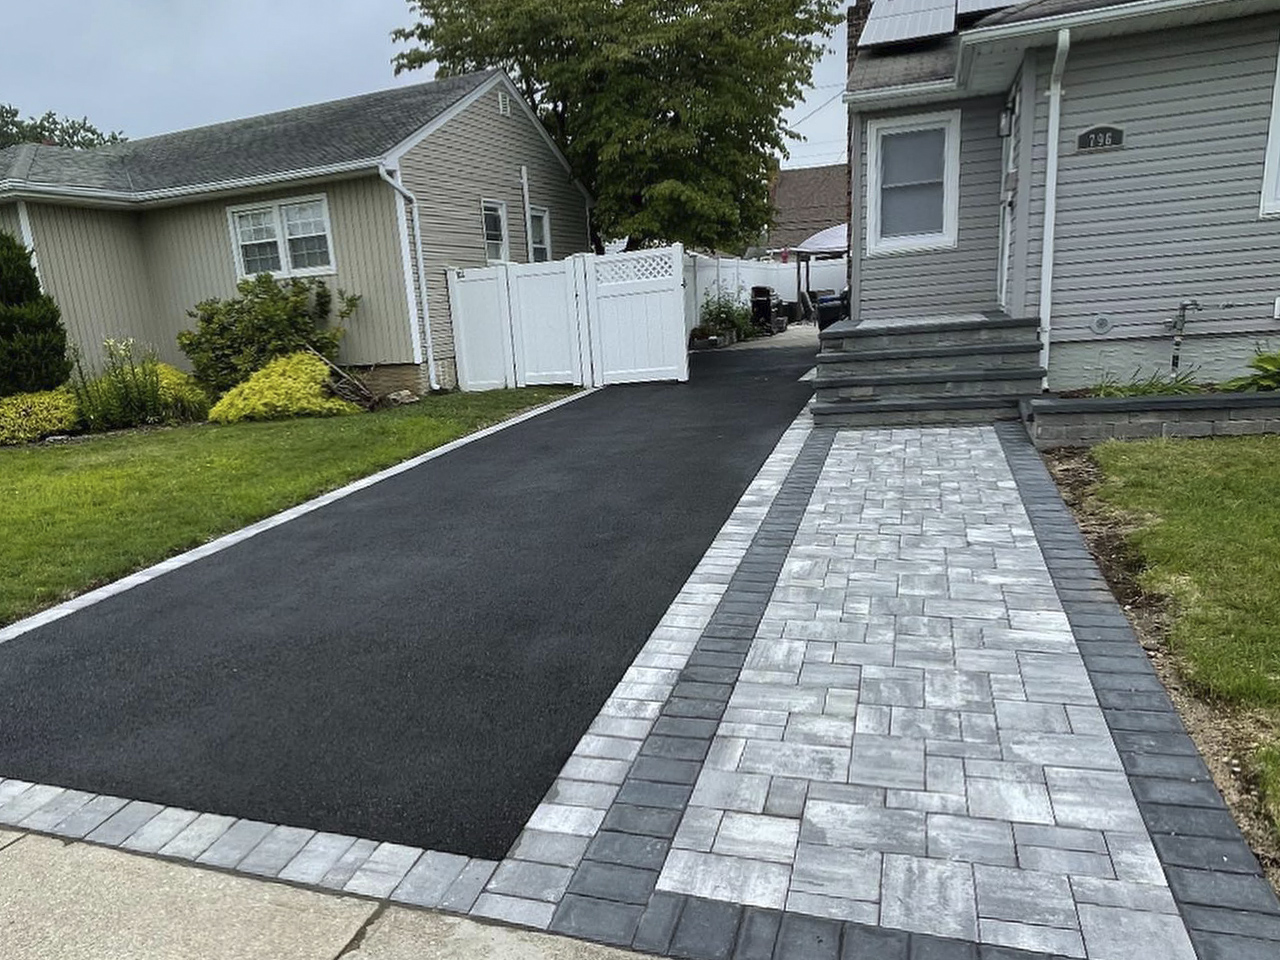 A beautifully paved driveway by Affordable Patio, featuring a smooth surface and precise craftsmanship